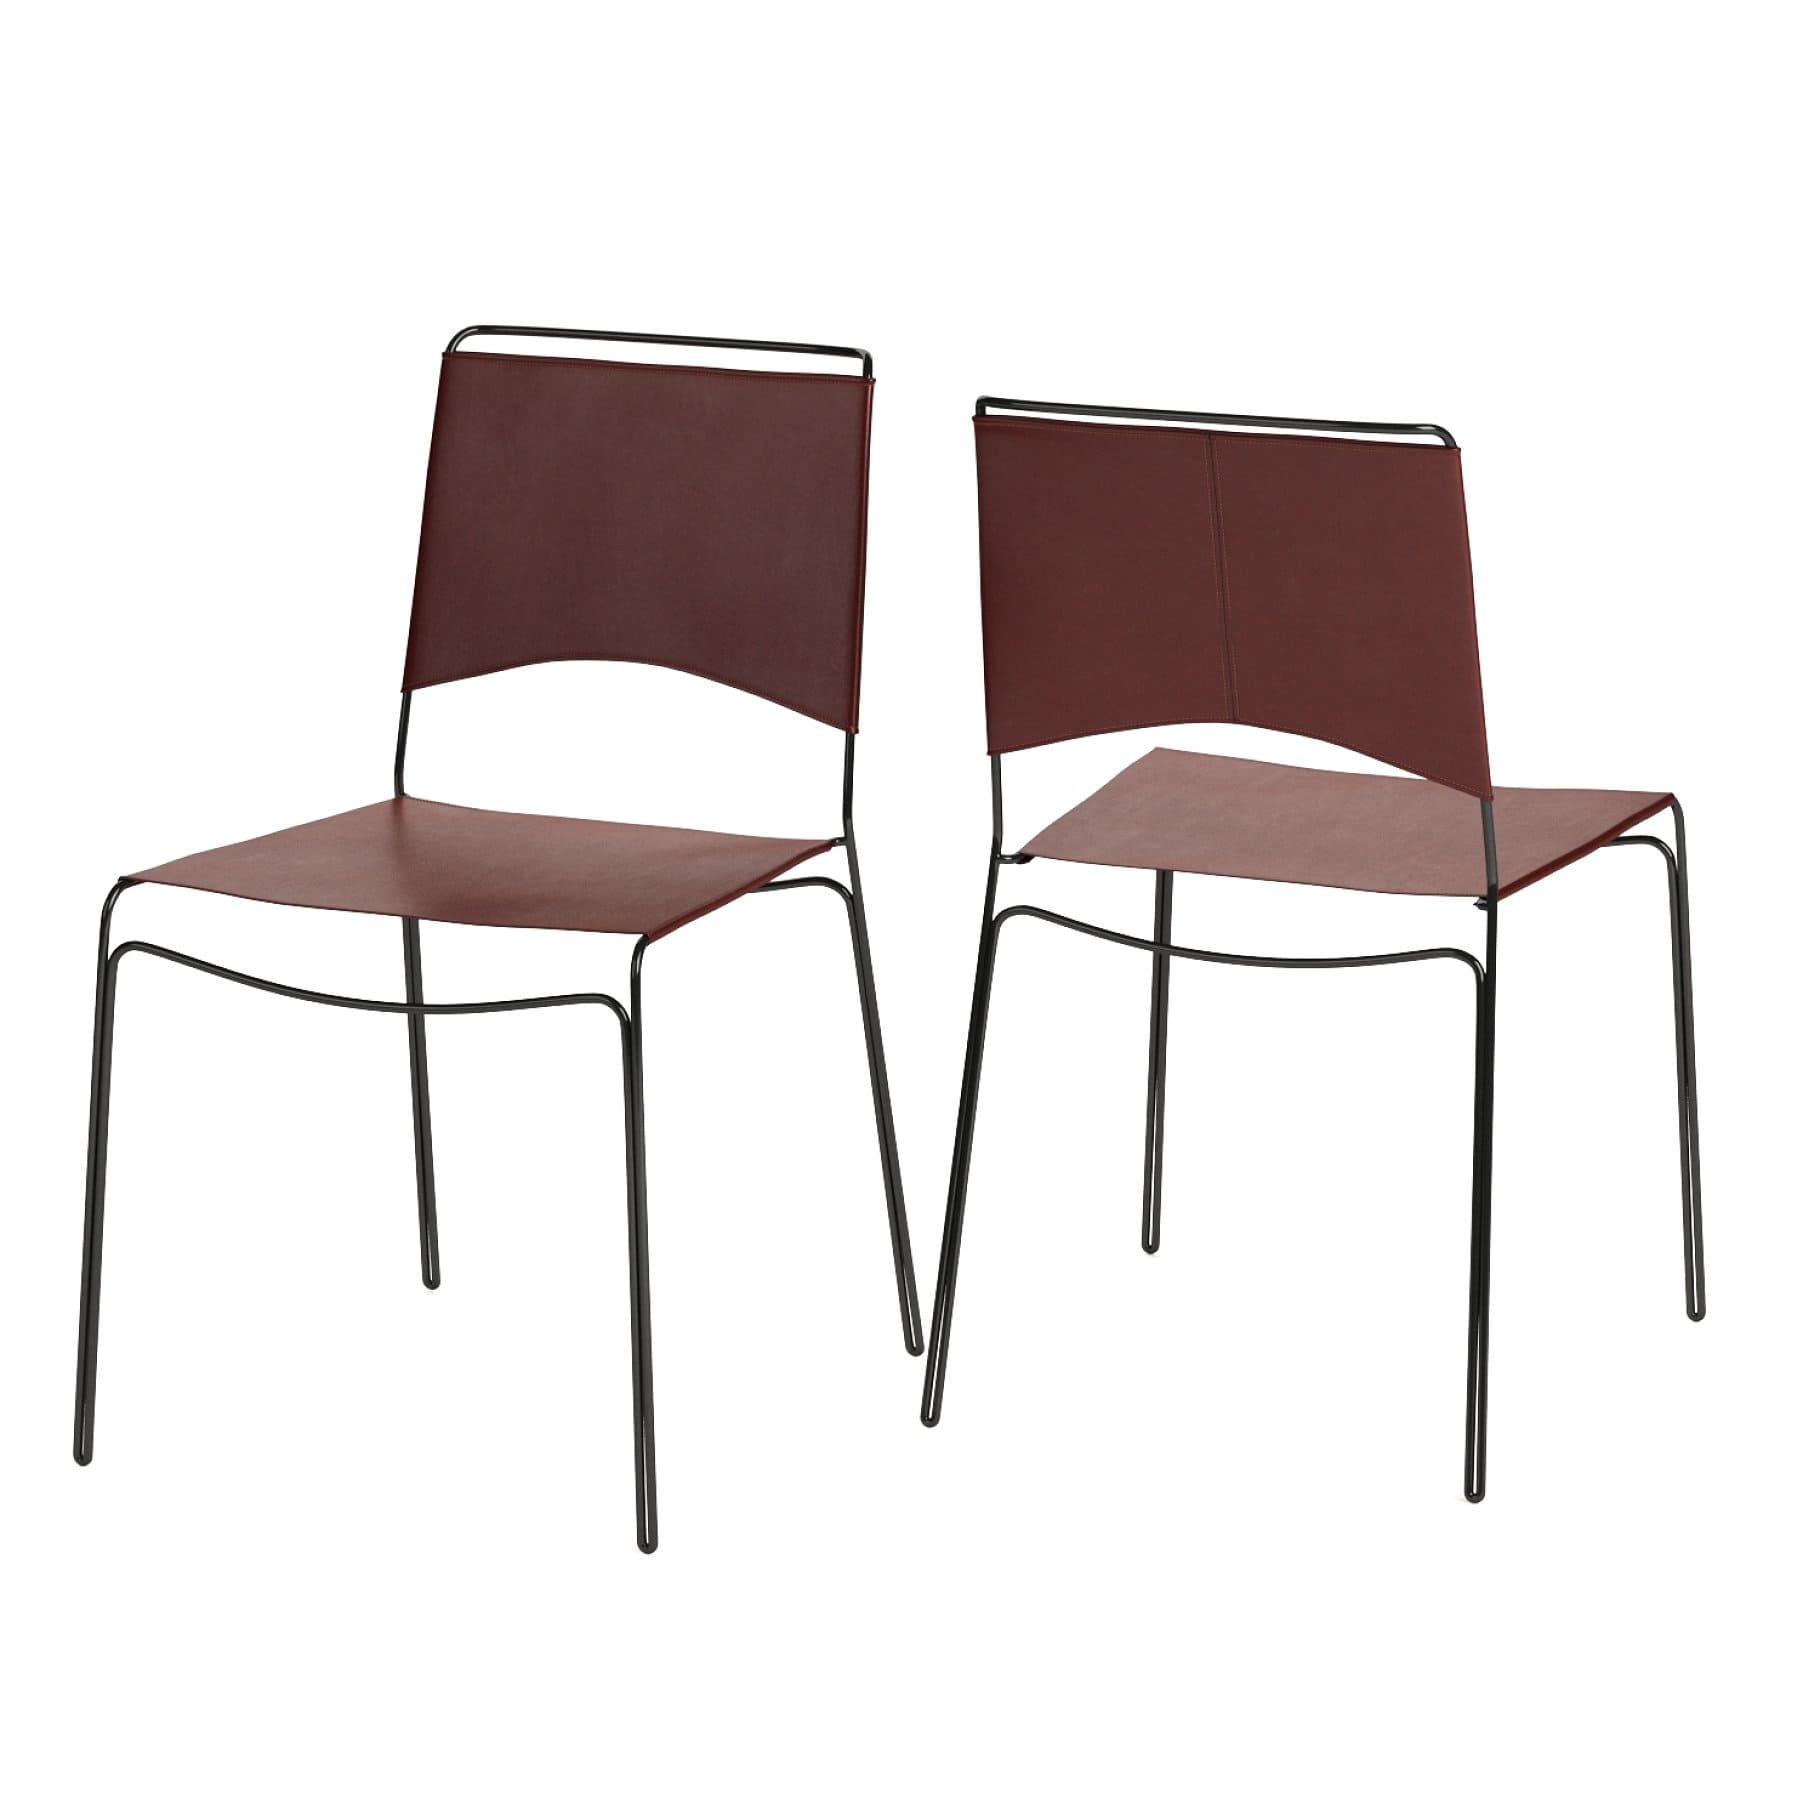 Two dark brown Trace Leather Chairs with a minimalist design.